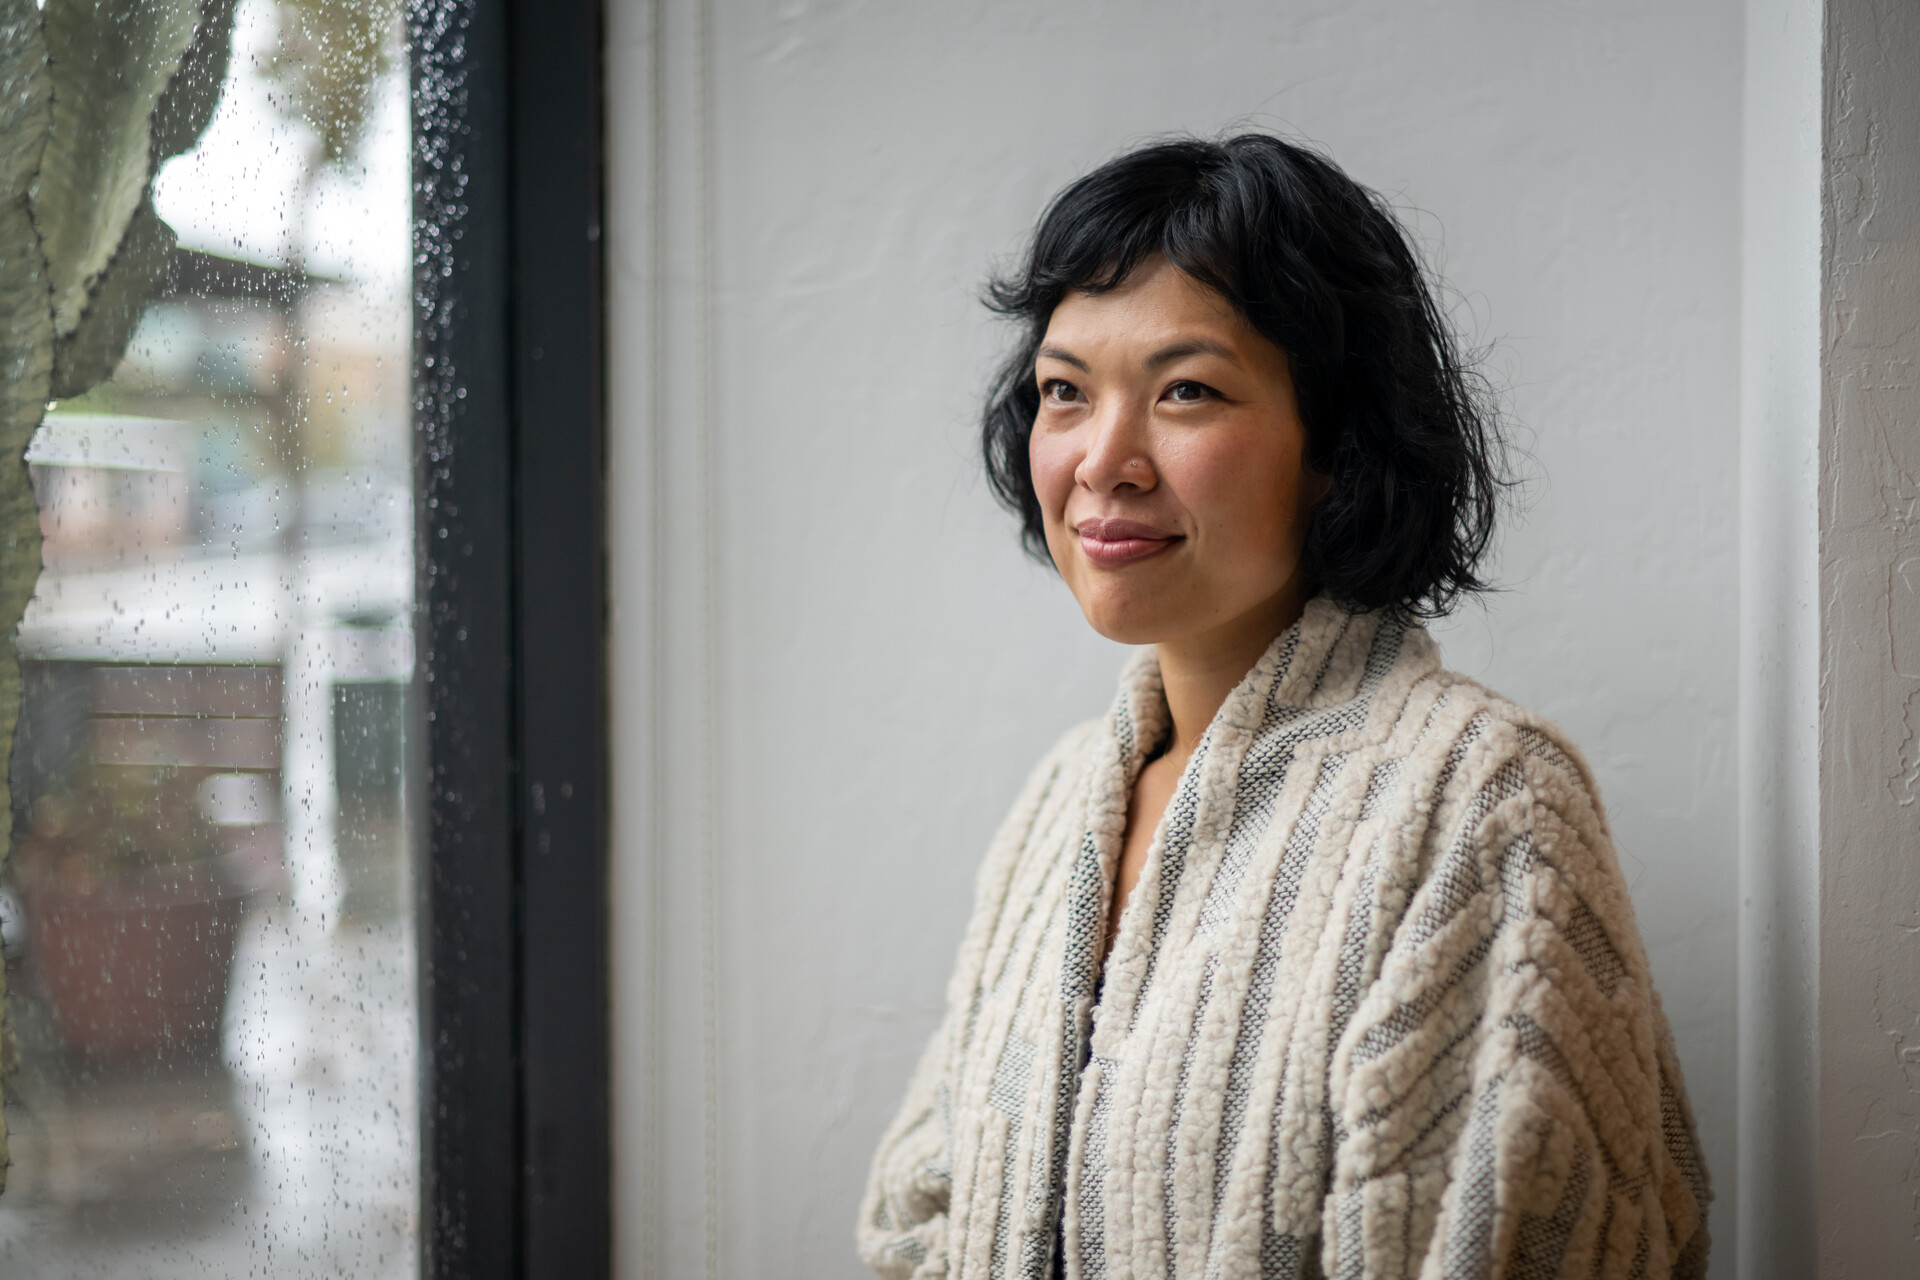 A woman sits right of frame looking left, smiling. She appears to be at a window sill looking out, while wearing a wool cardigan.